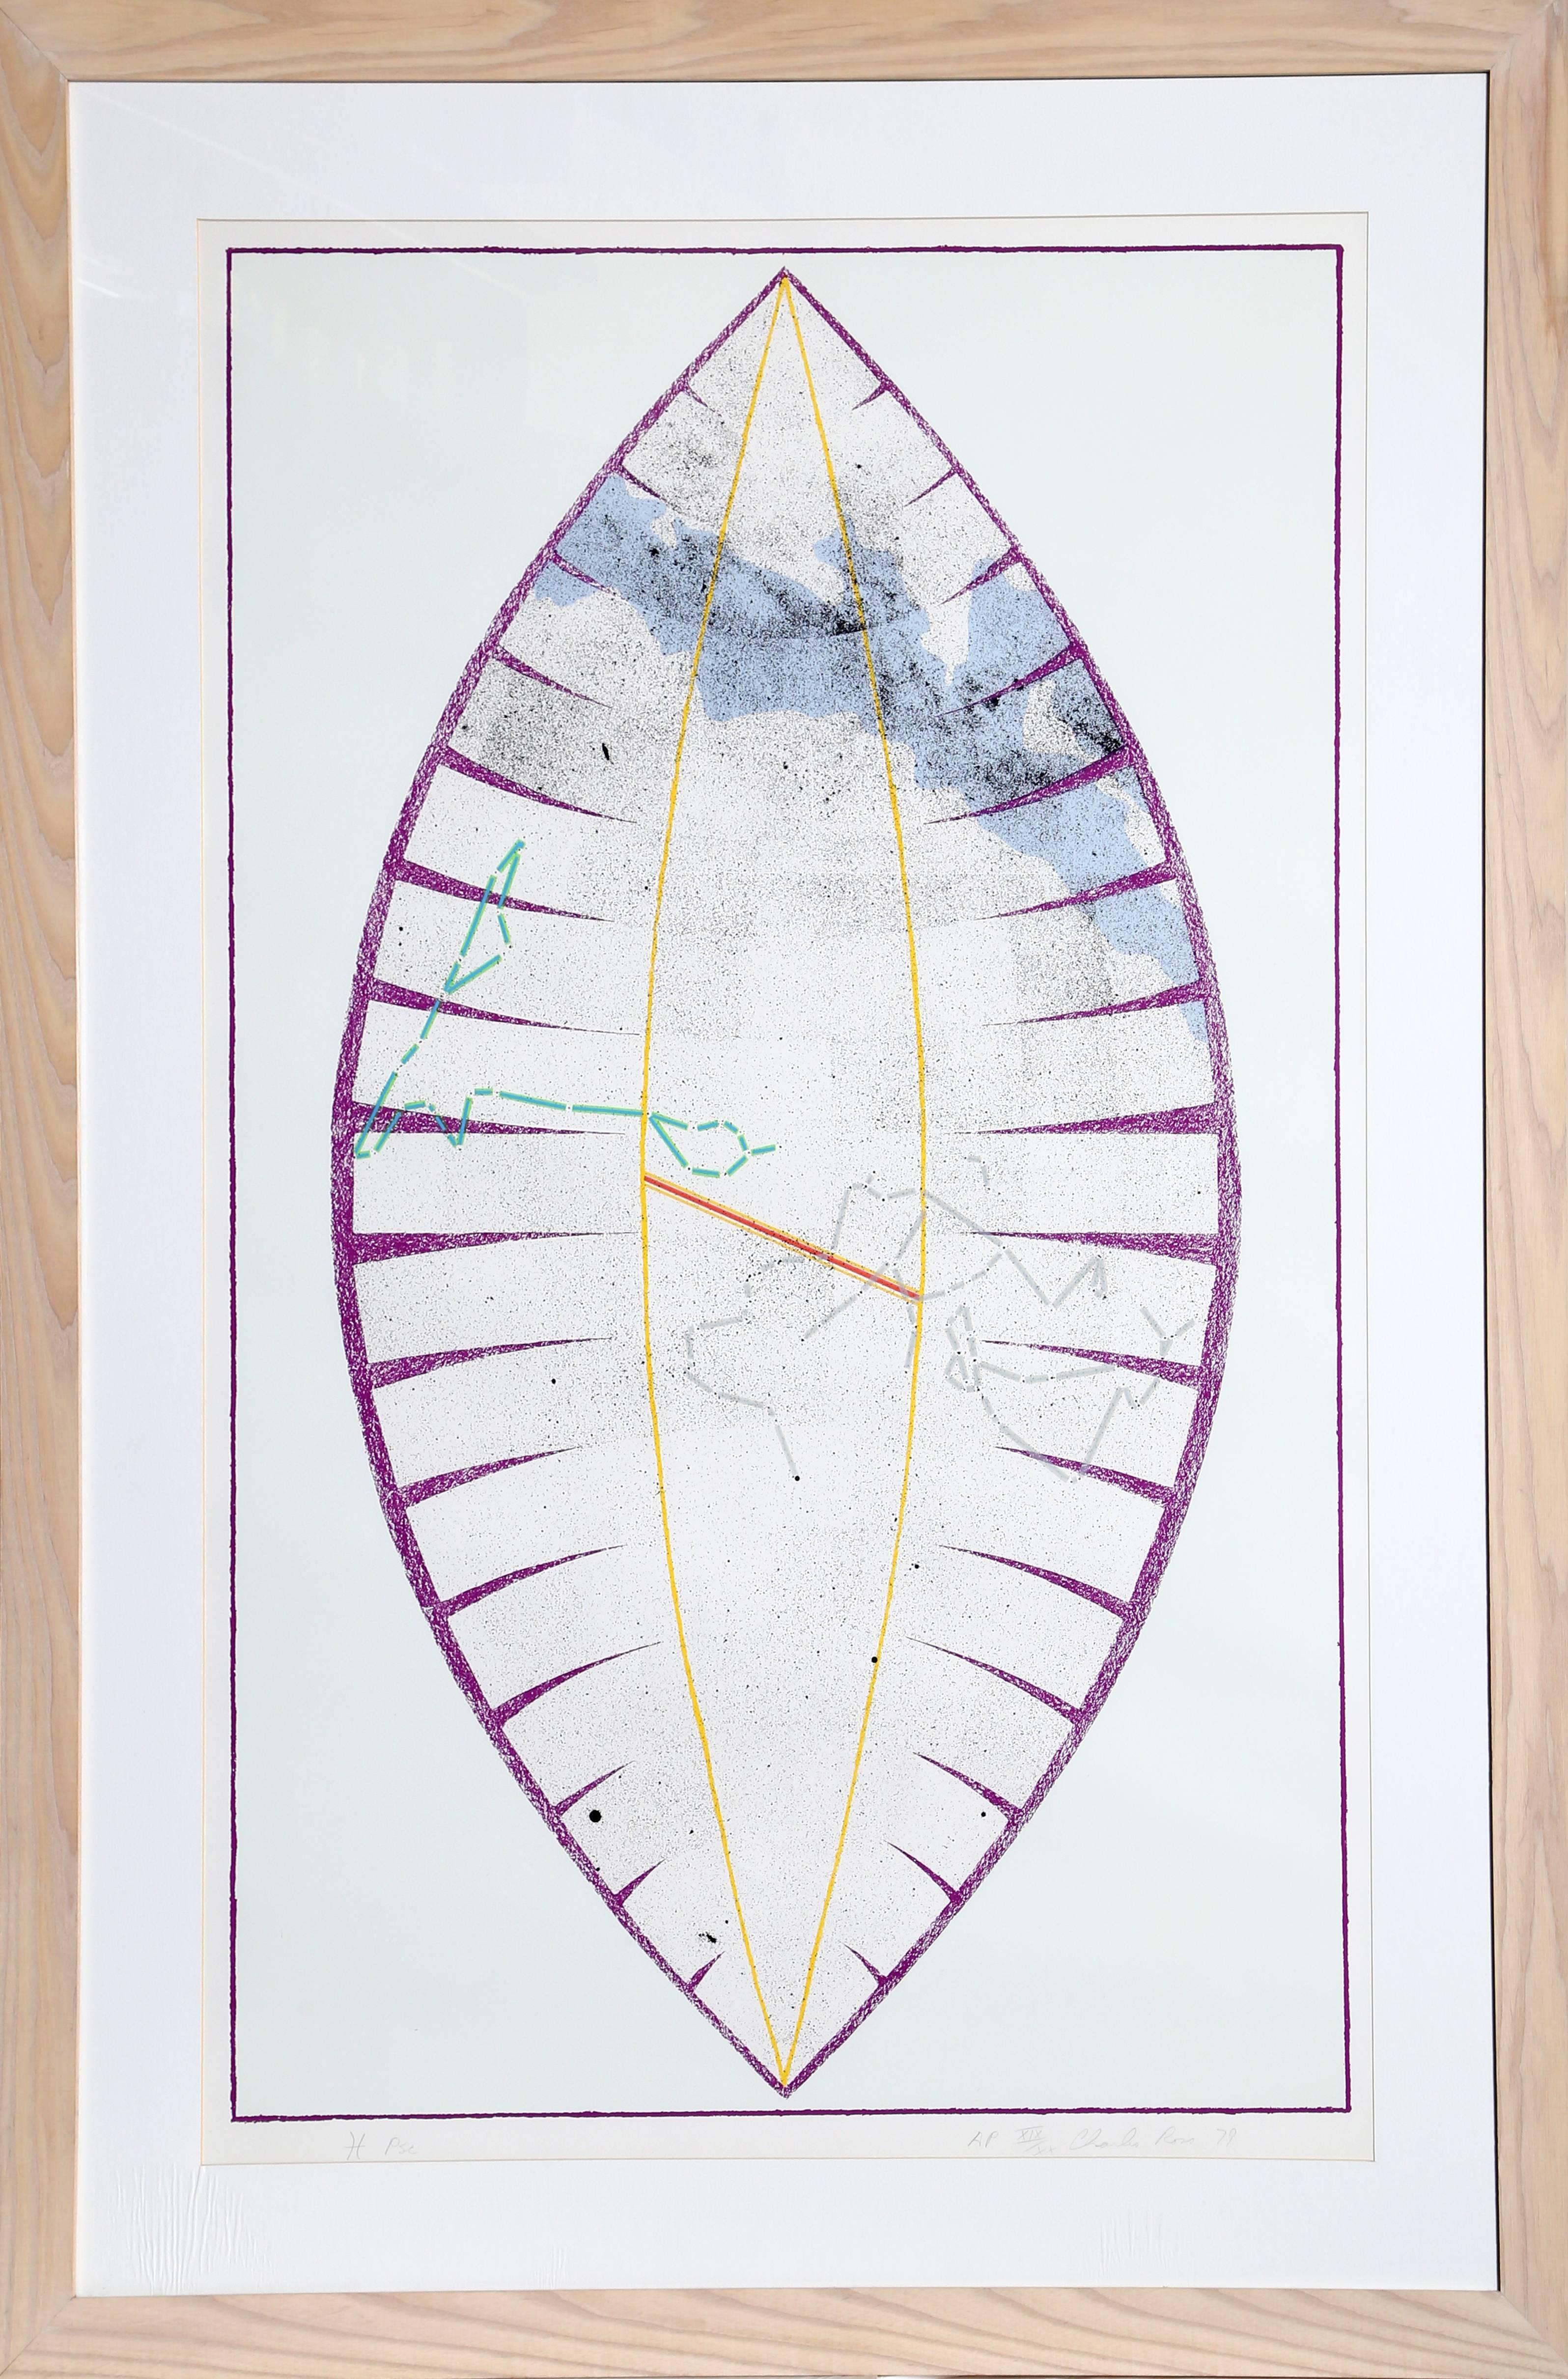 Artist: Charles Ross, American (1937 - )
Title: Pisces from the Constellations Series
Year: 1979
Medium: Silkscreen, Signed and numbered in pencil
Edition: 150, AP XX
Image Size: 45 x 28 inches
Size: 49 in. x 32.5 in. (124.46 cm x 82.55 cm)
Frame: